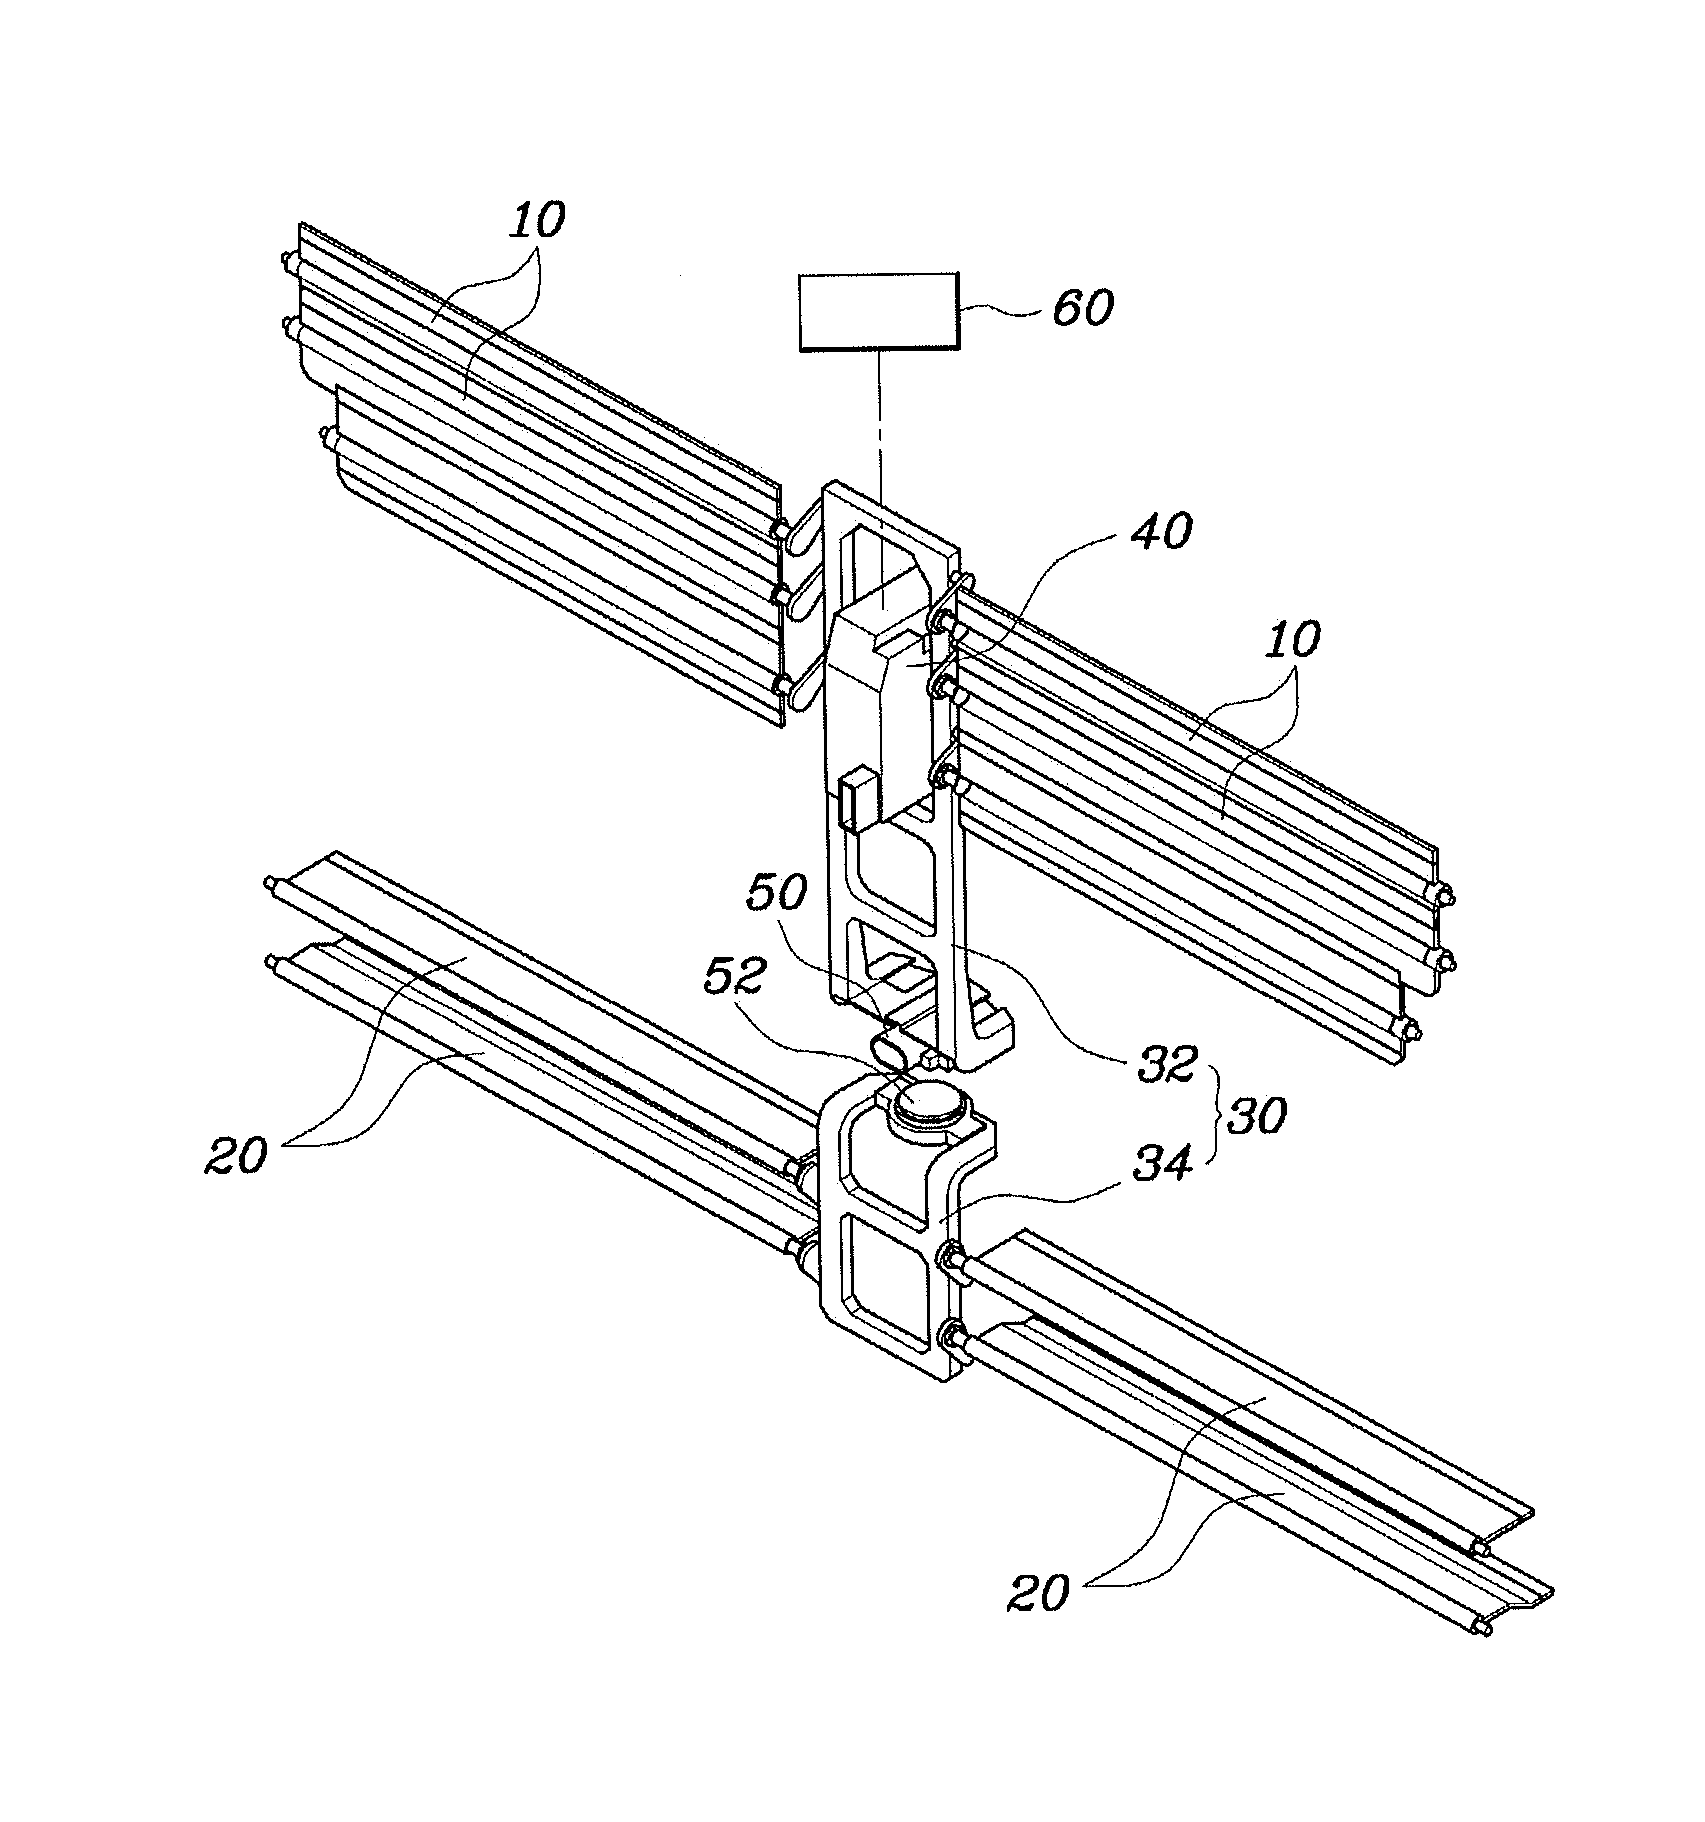 Active air flap device for vehicles